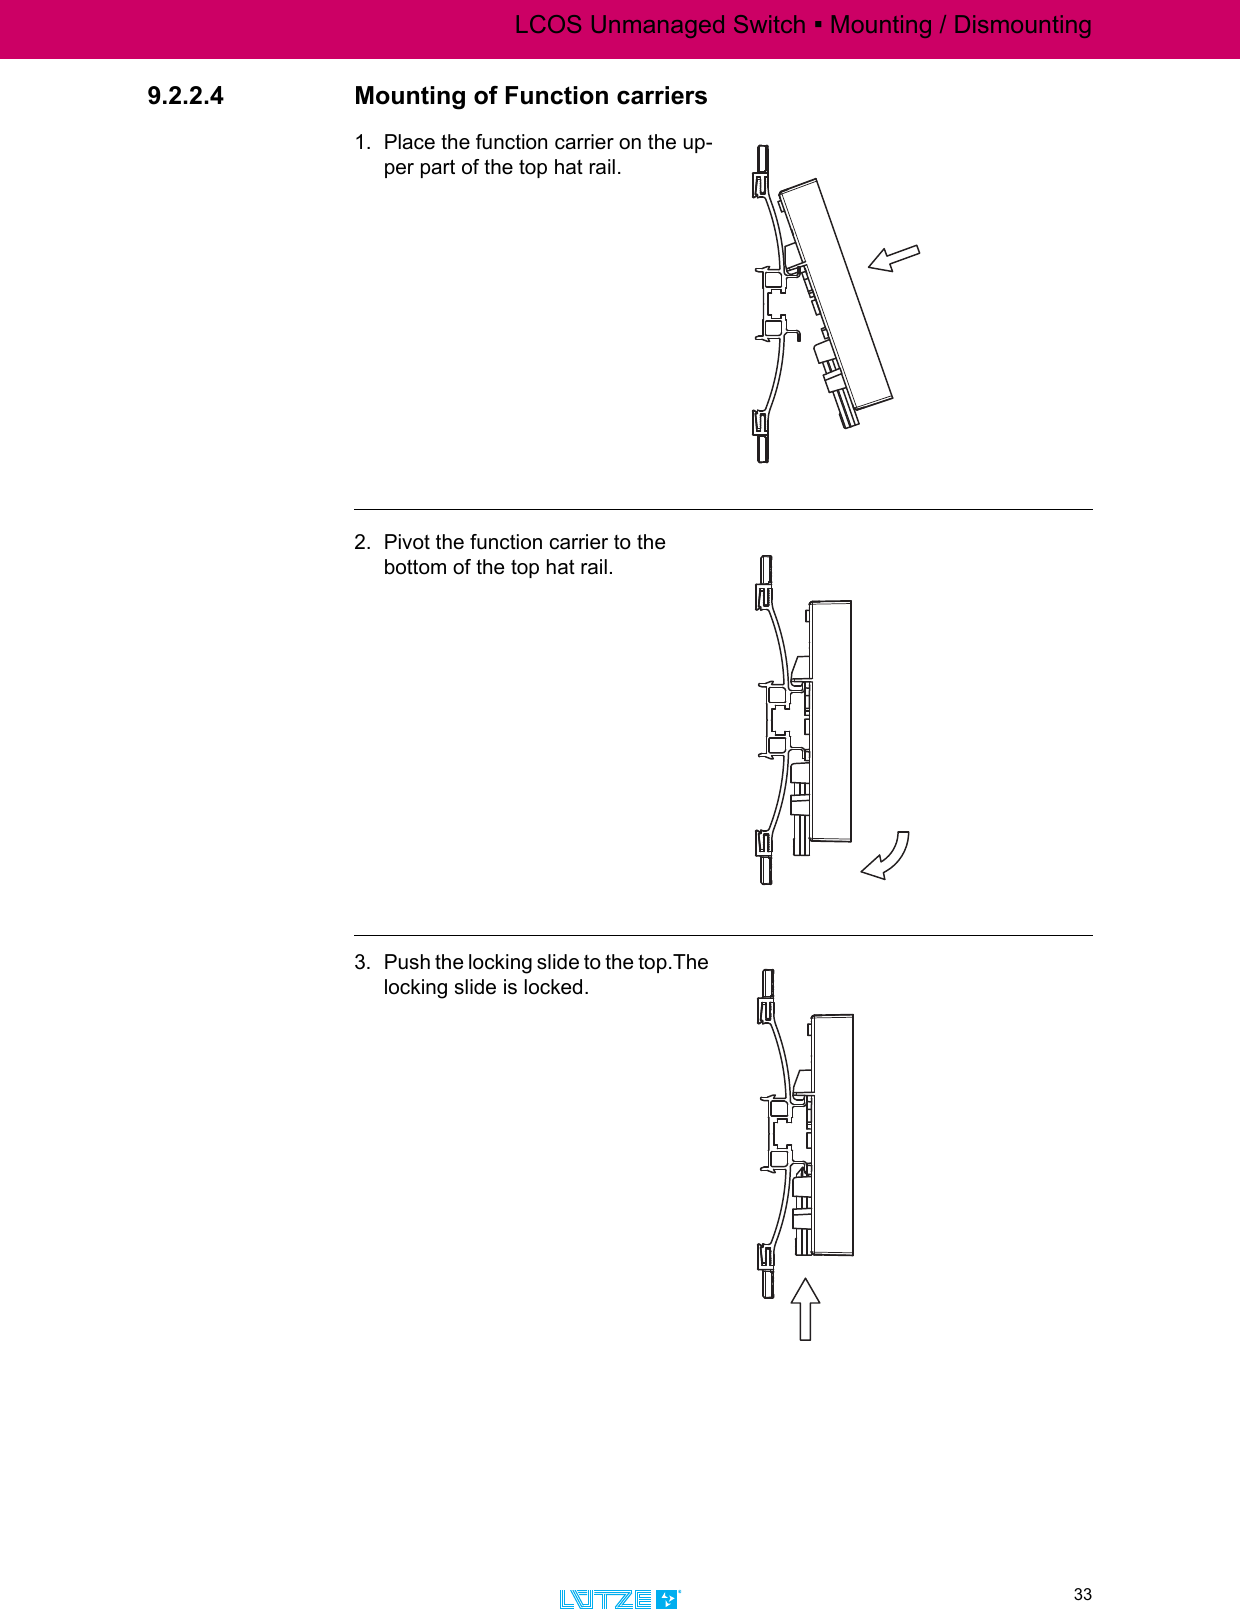 LCOS Unmanaged Switch ▪ Mounting / Dismounting33TRANSPORTATION9.2.2.4 Mounting of Function carriers1. Place the function carrier on the up-per part of the top hat rail.2. Pivot the function carrier to the bottom of the top hat rail.3. Push the locking slide to the top.The locking slide is locked.